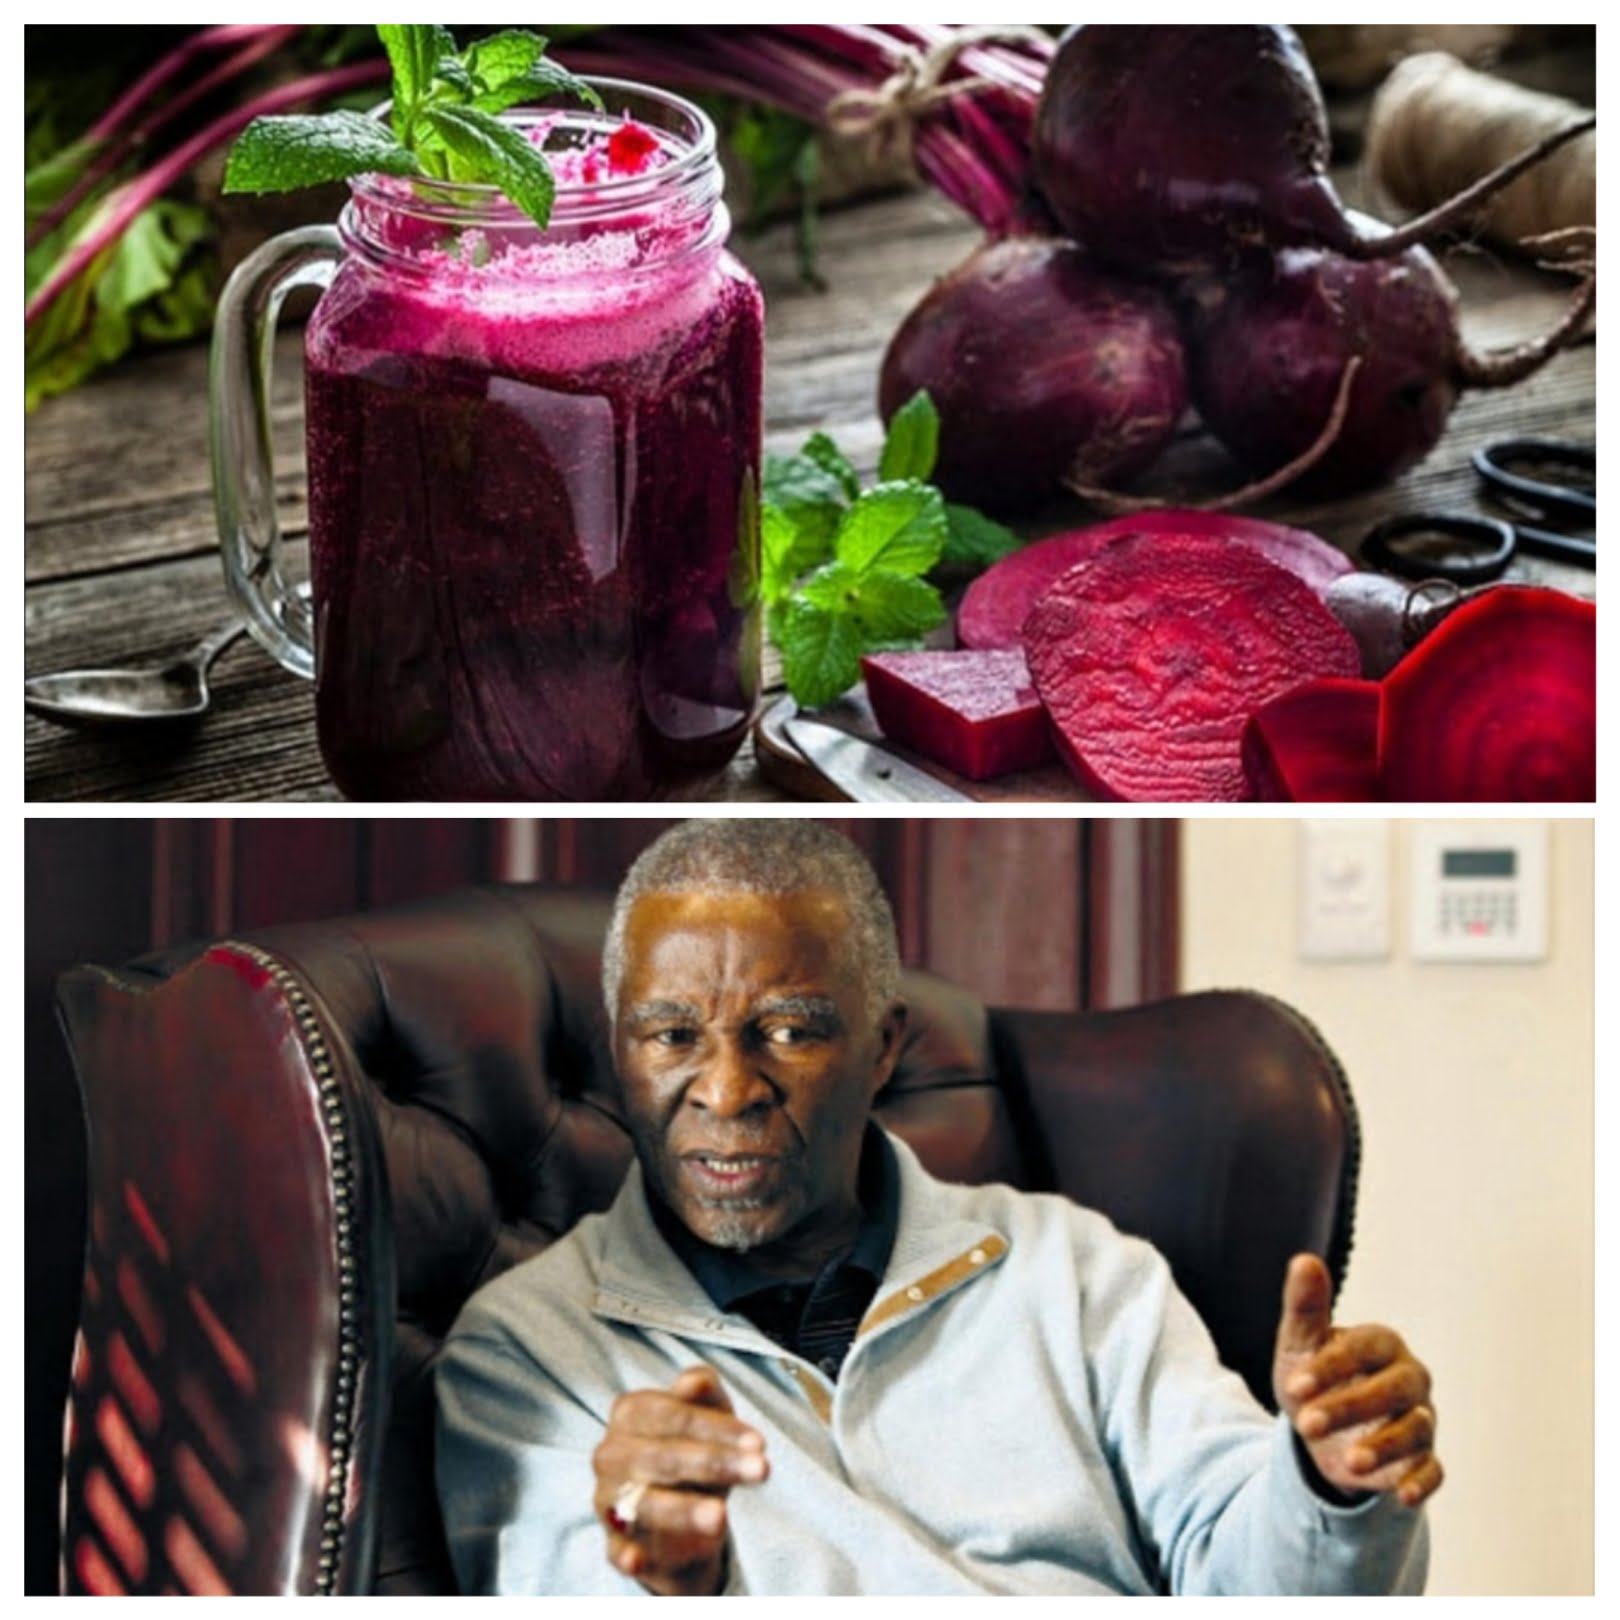 Big Question| Does Thabo Mbeki still believe beetroot can cure HIV/AIDS